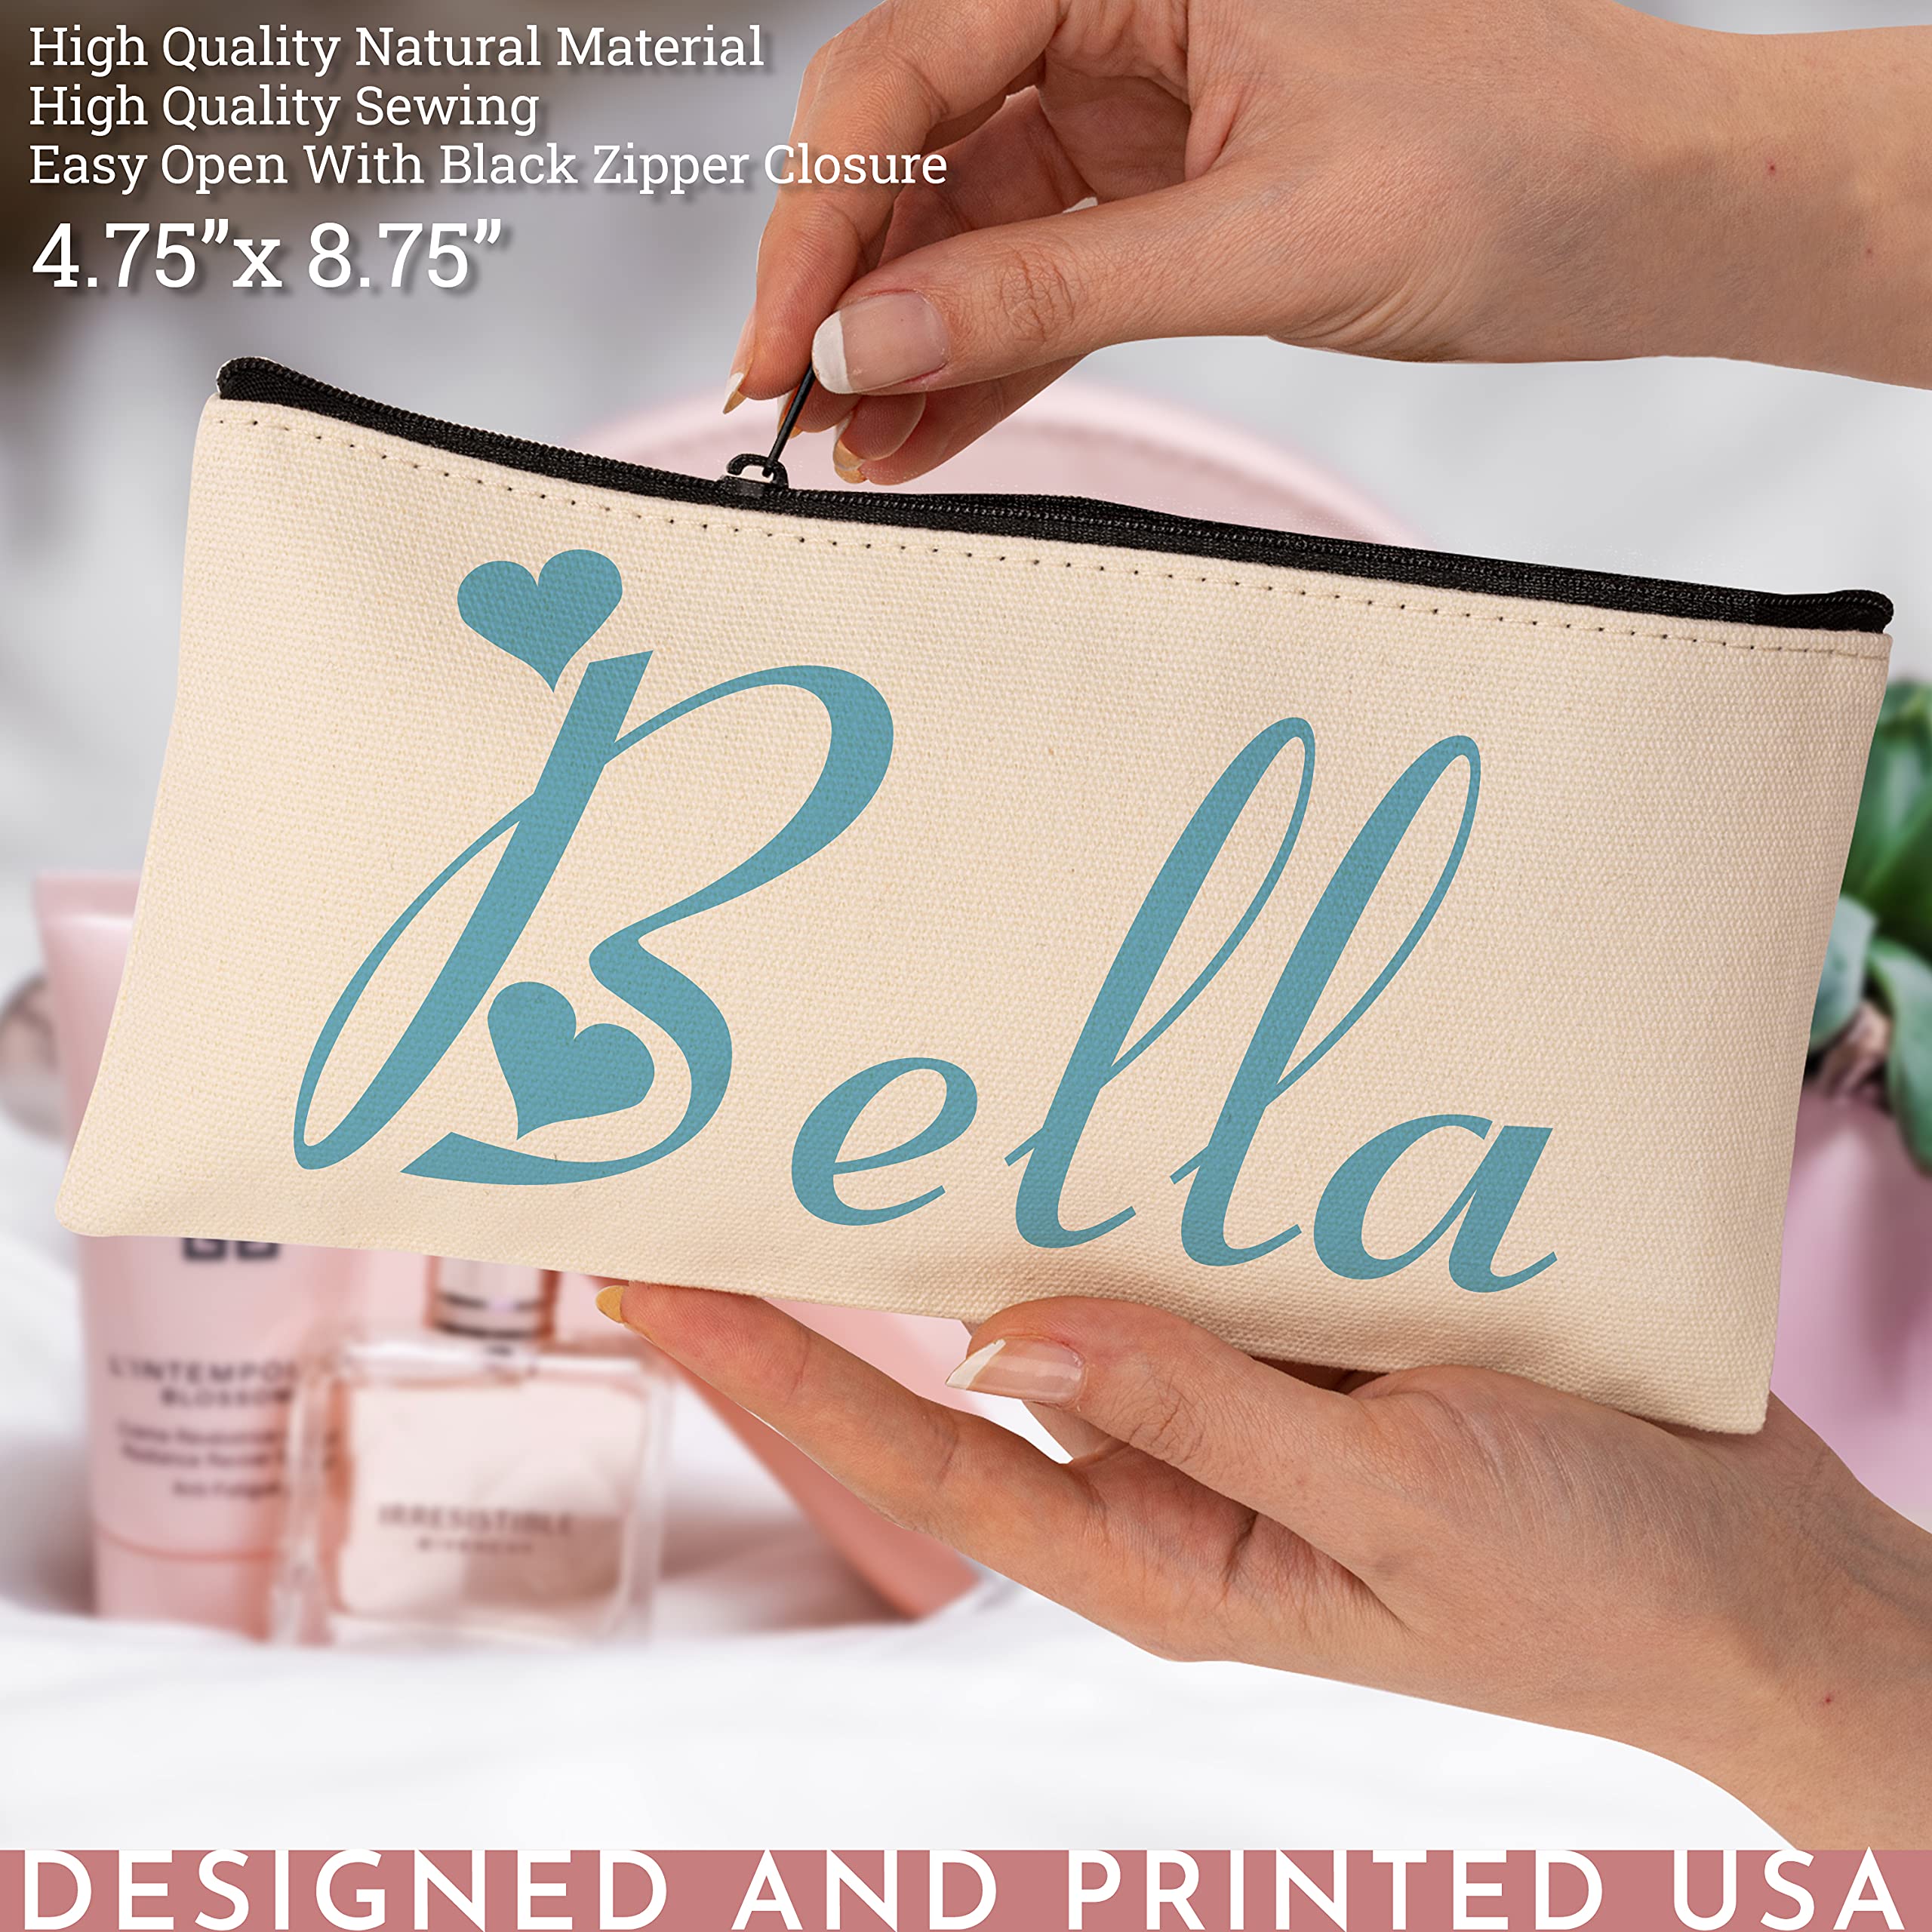 Zexpa Apparel Personalized Makeup Bag - 12 Font Type 9 Font Color 6x10 - Customize Name Travel and Cosmetic Pouch Organizer - Custom Make Up/Toiletry Bags - Christmas Gift